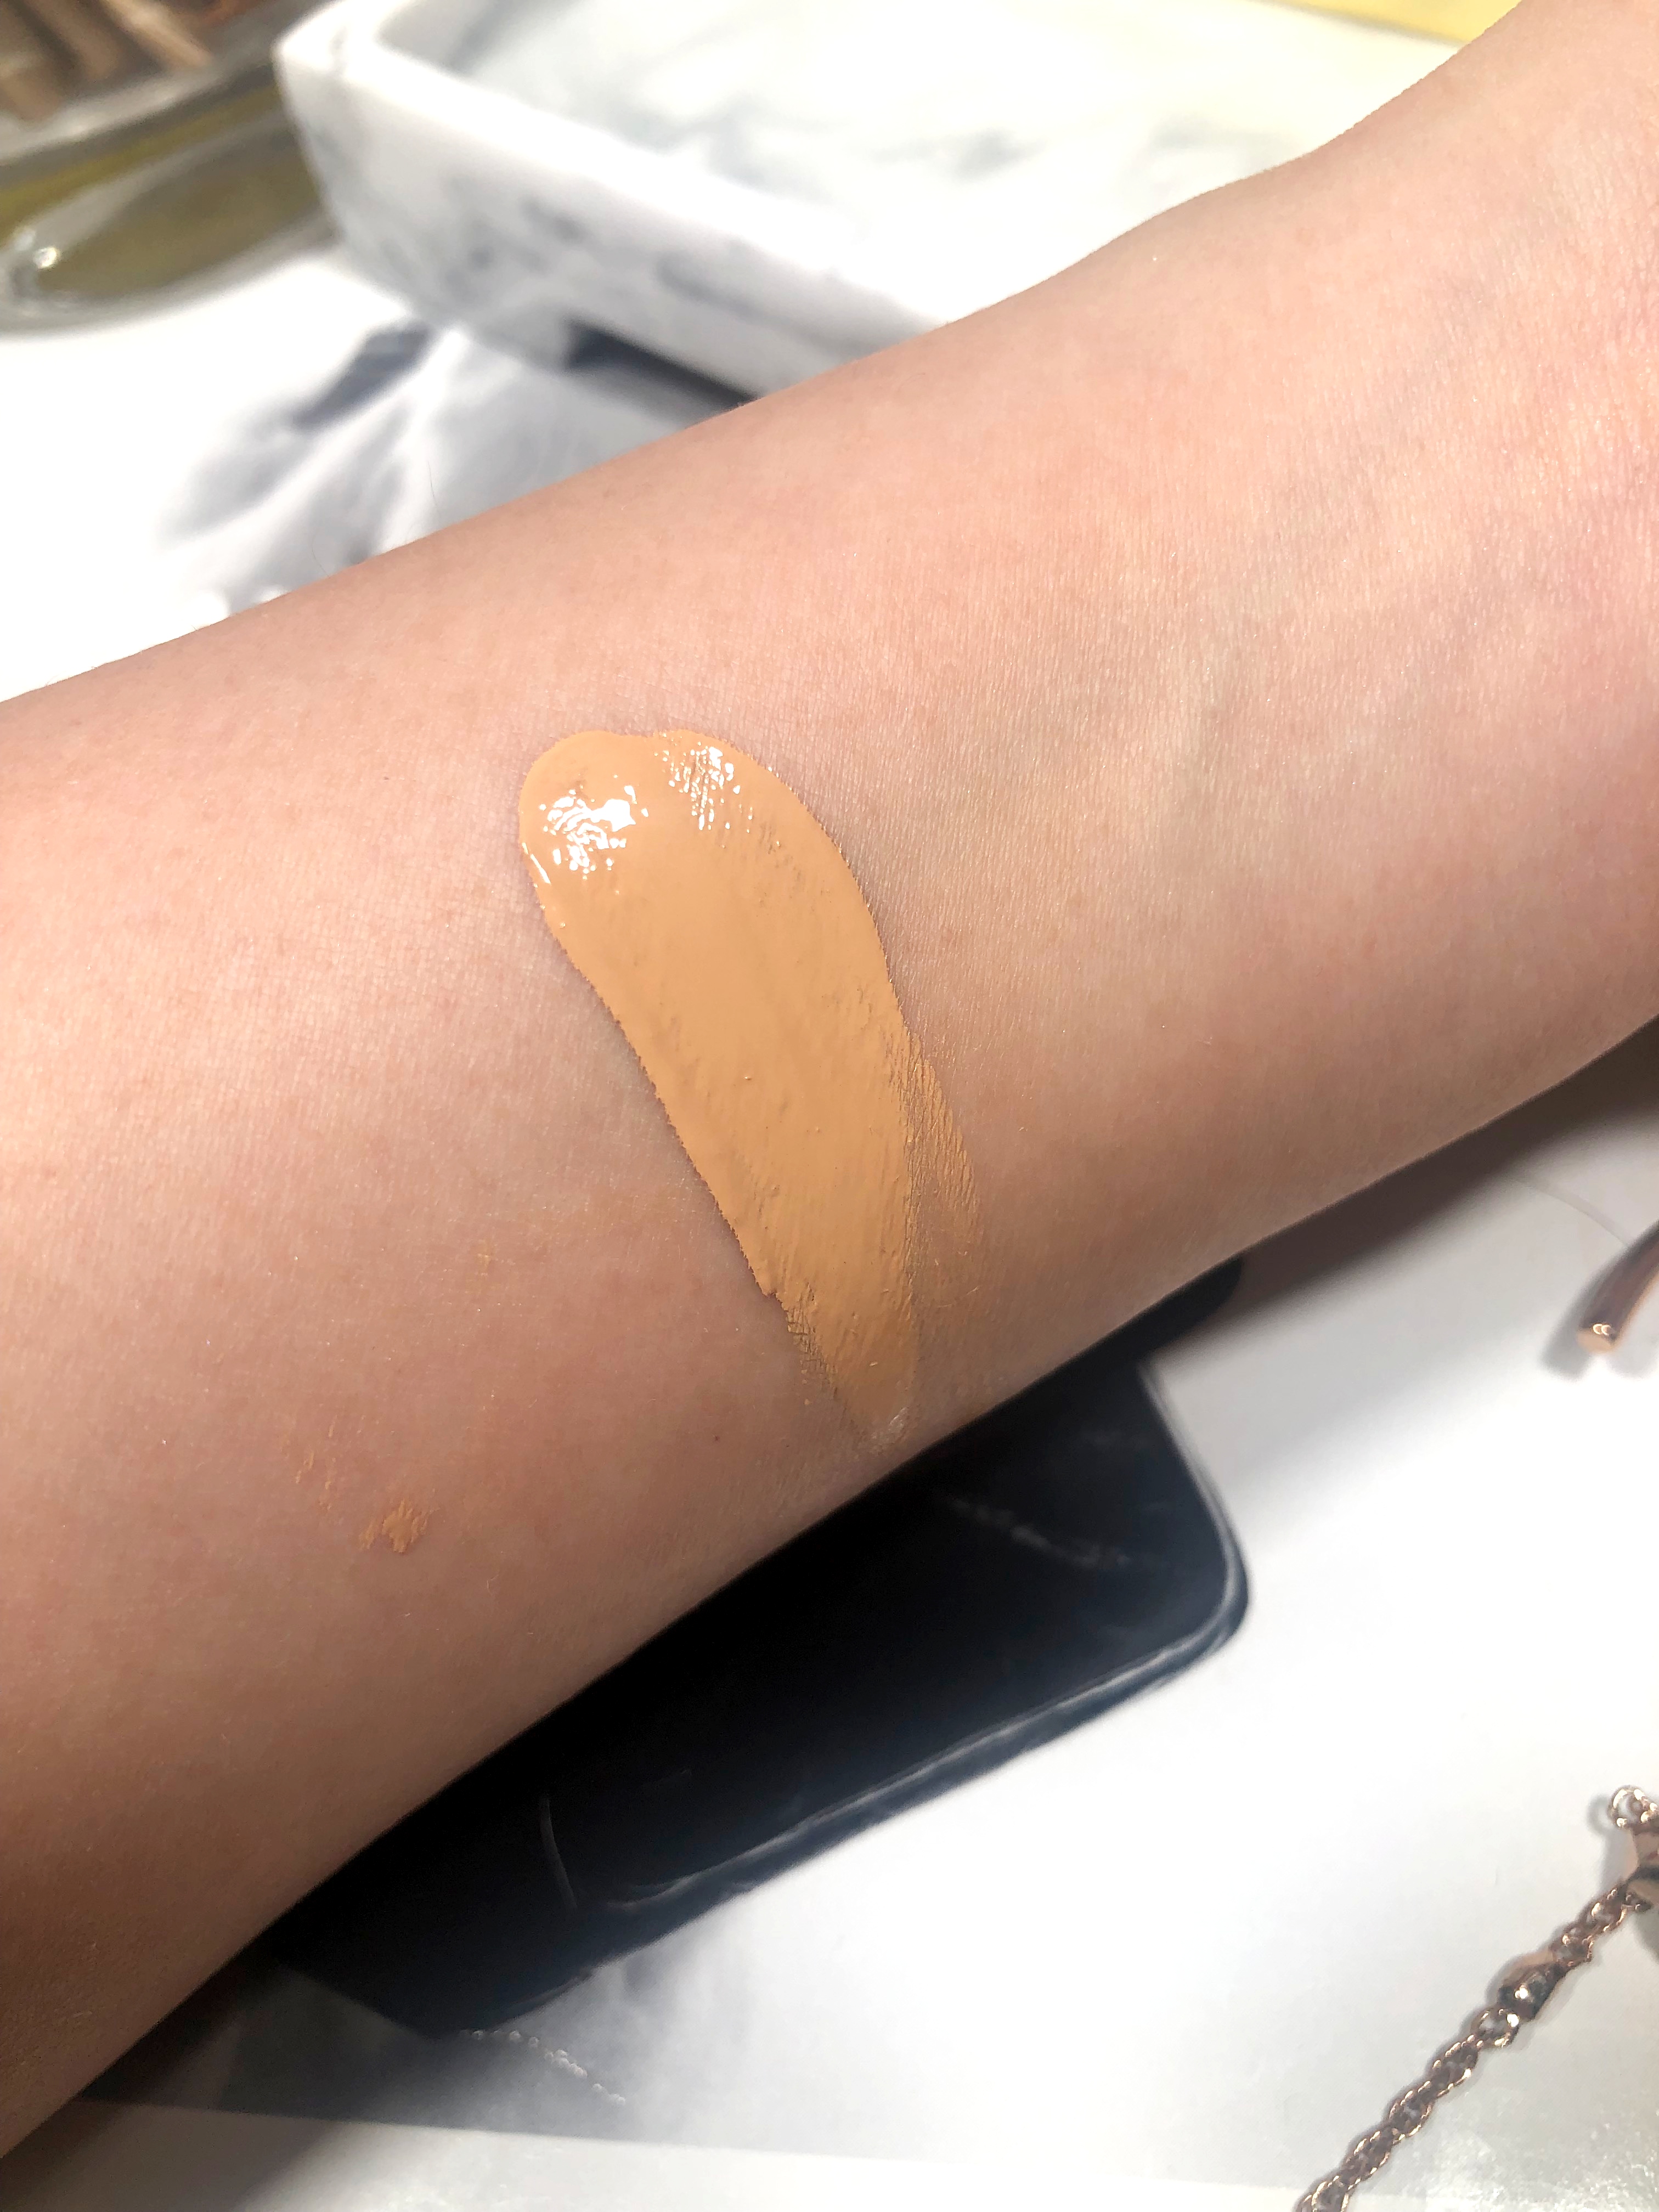 Charlotte Tilbury Beautiful Skin Medium Coverage Liquid Foundation with Hyaluronic Acid Review and Swatches